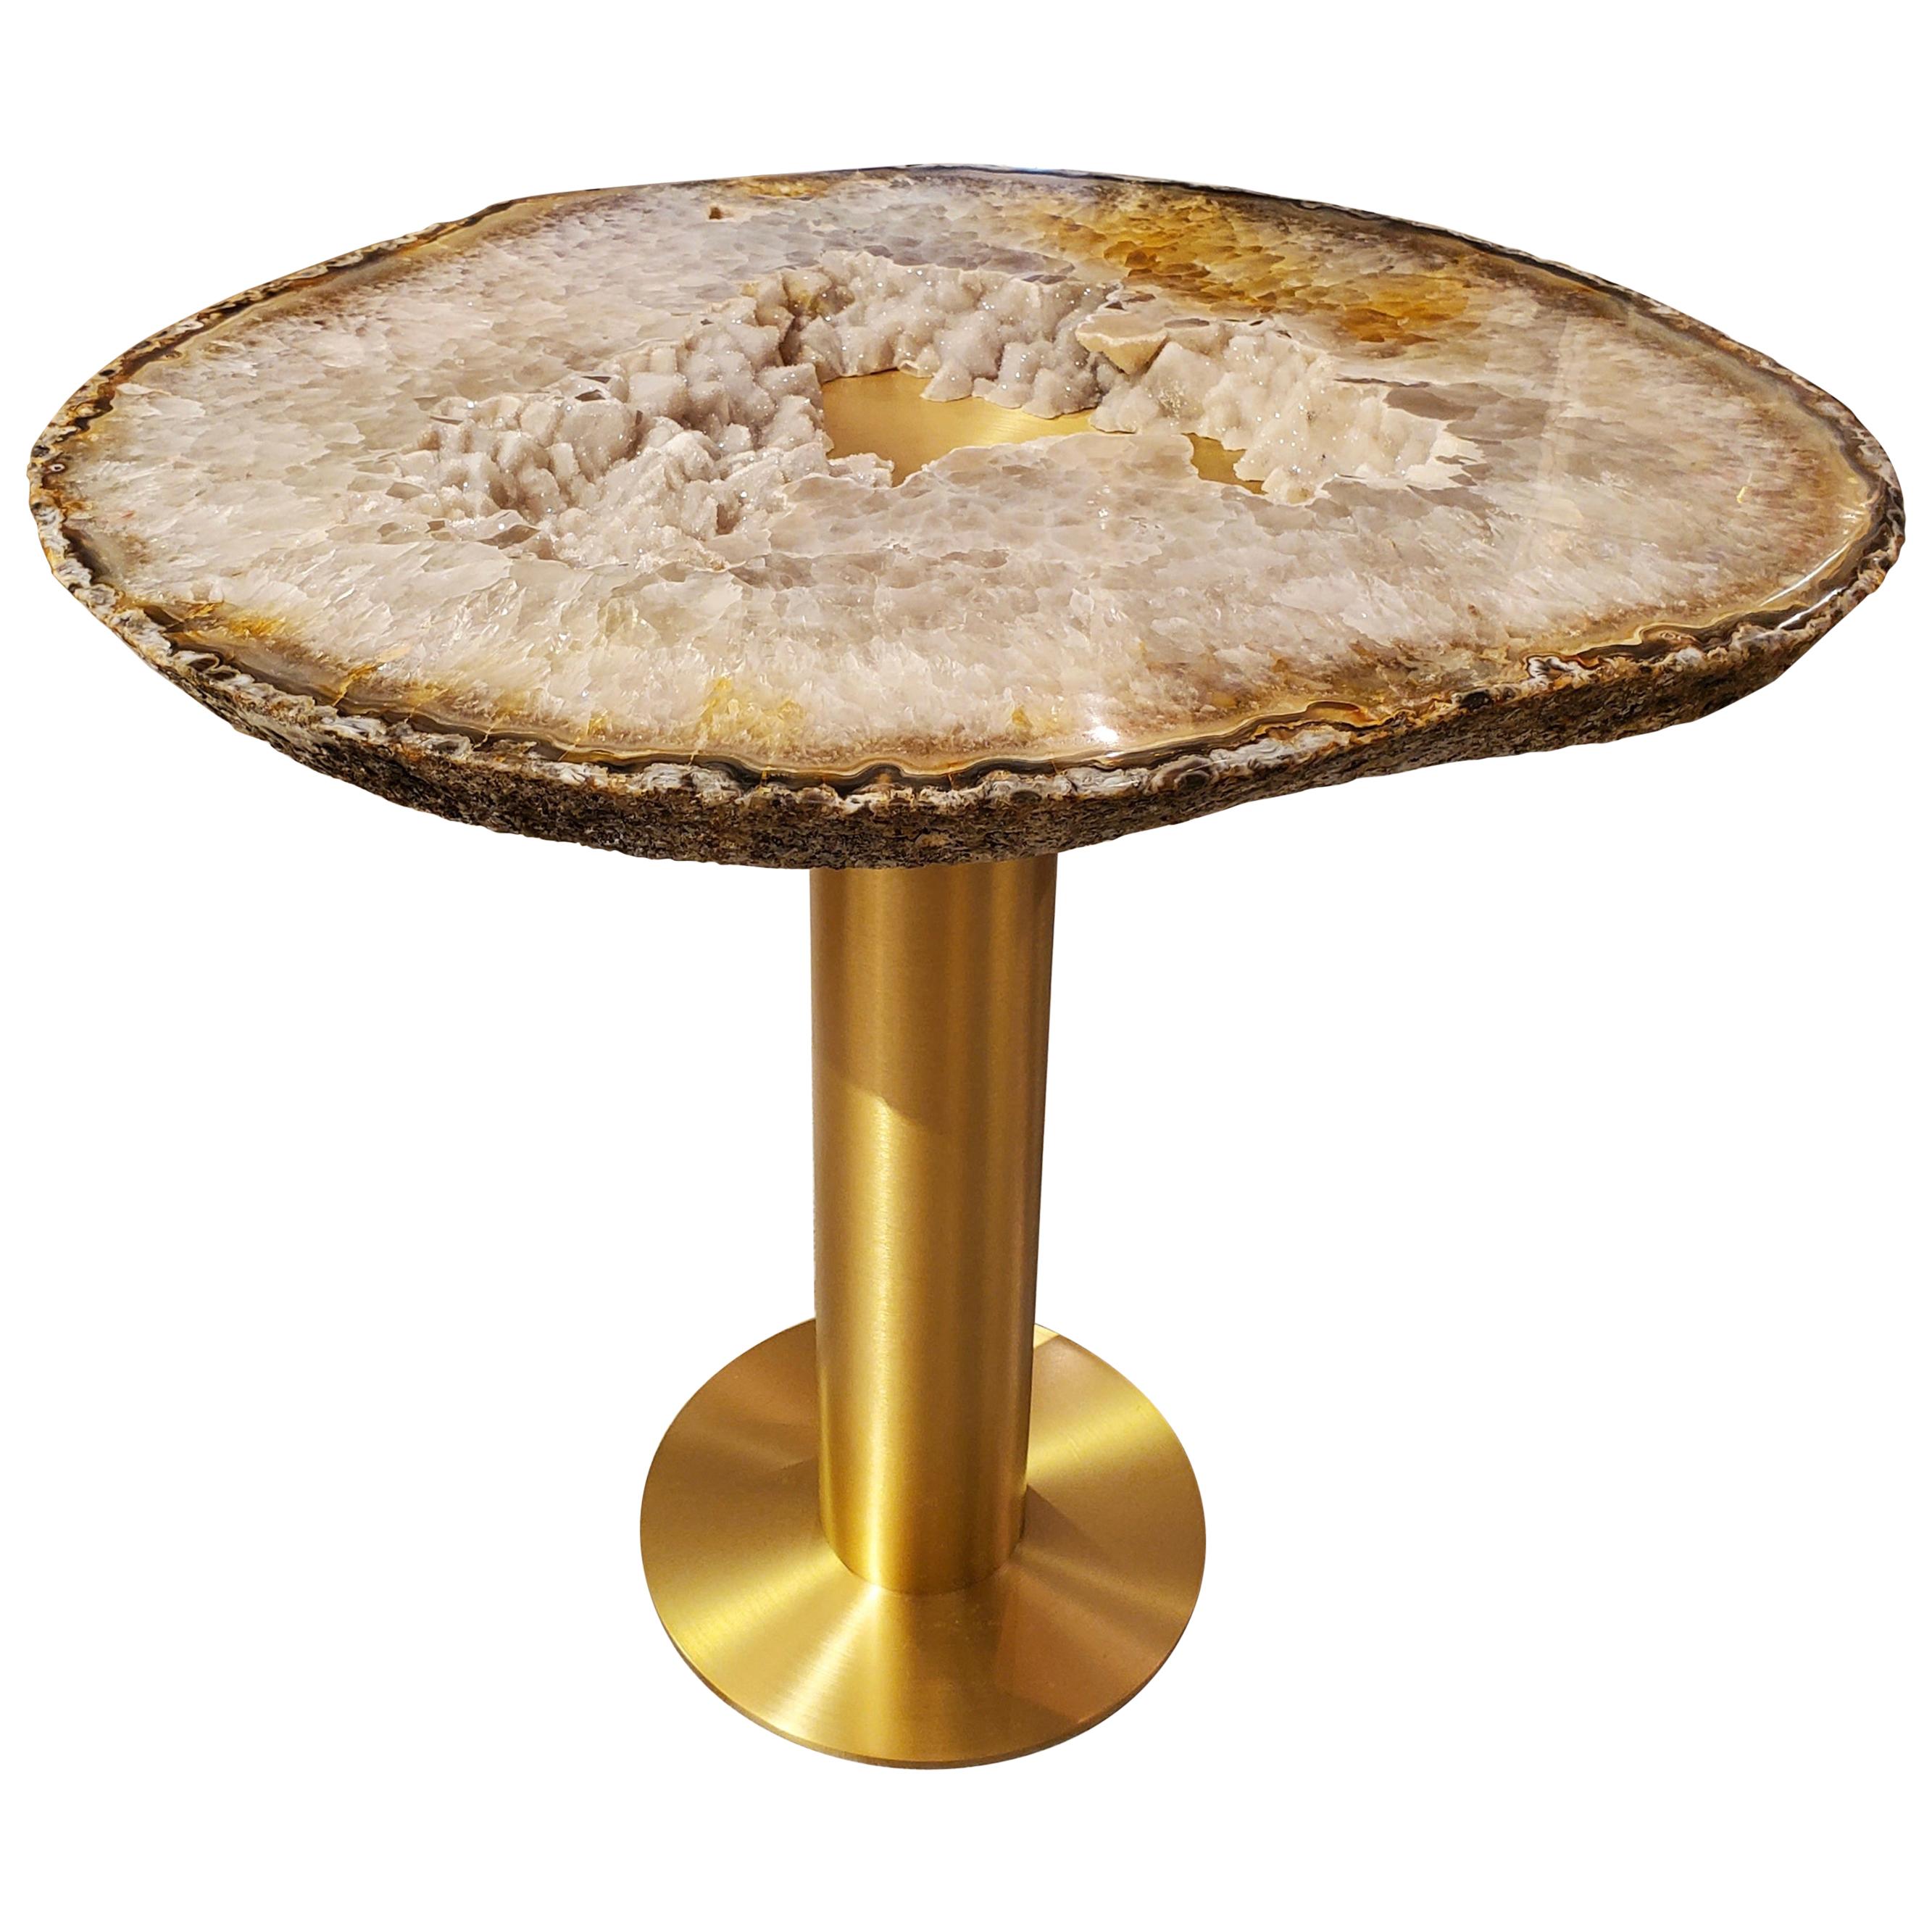 "Moonscape" White, Gray, Rust Agate Table on Custom Satin Brass Base by Amy Zook